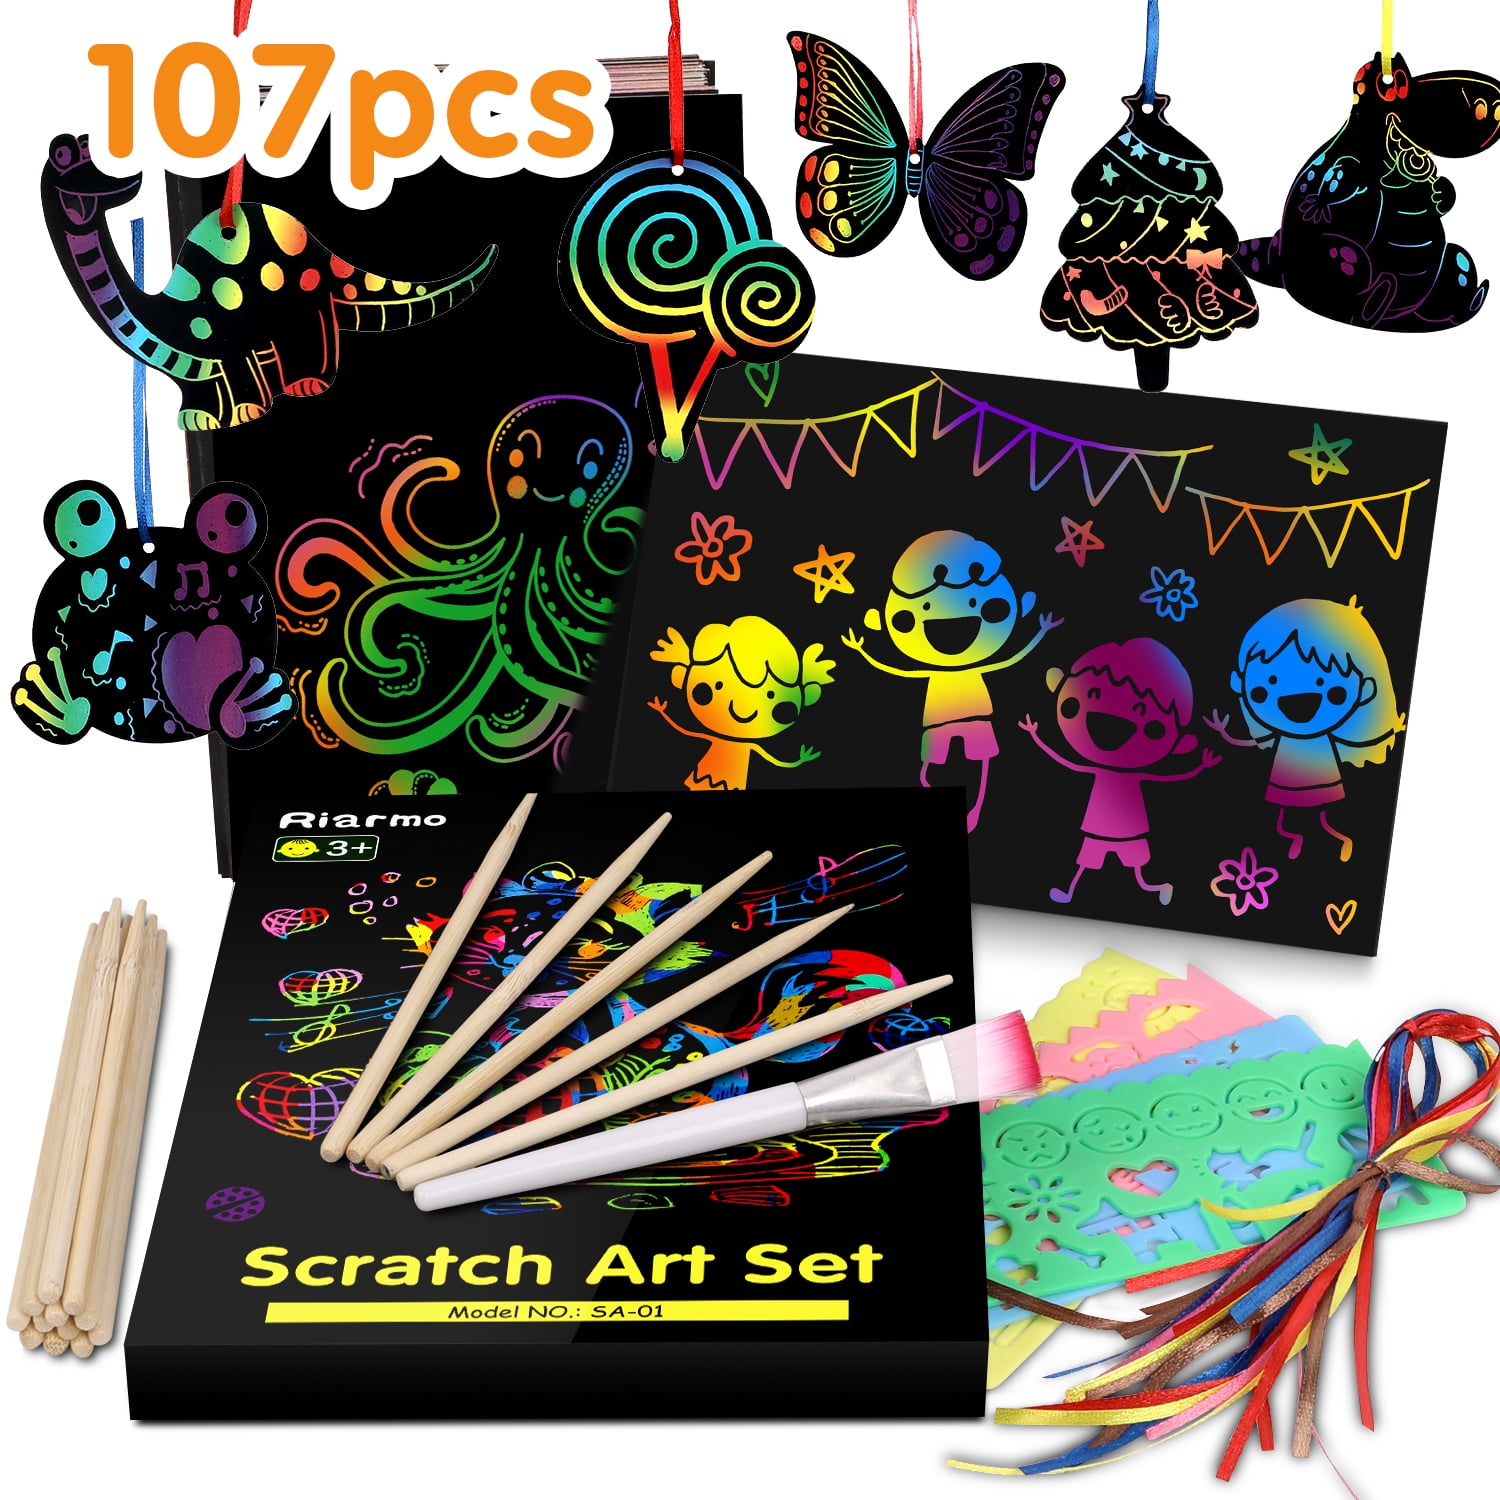 30PCS Scratch Paper Set Easy Carrying Rainbow Off Scratch Paper Craft For  Kids